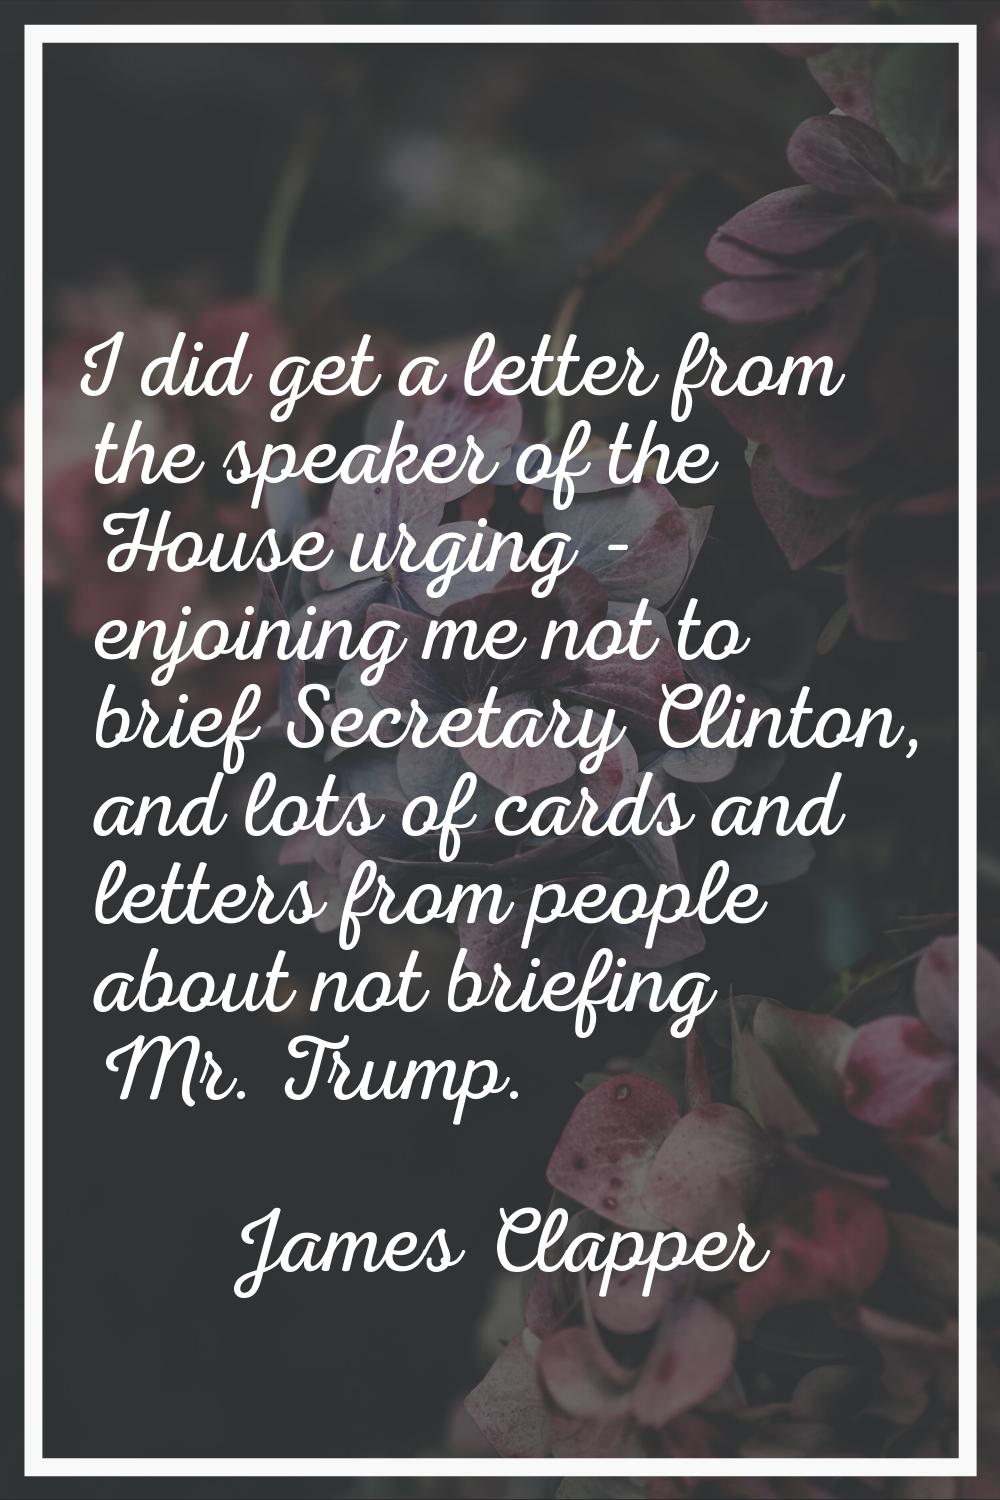 I did get a letter from the speaker of the House urging - enjoining me not to brief Secretary Clint